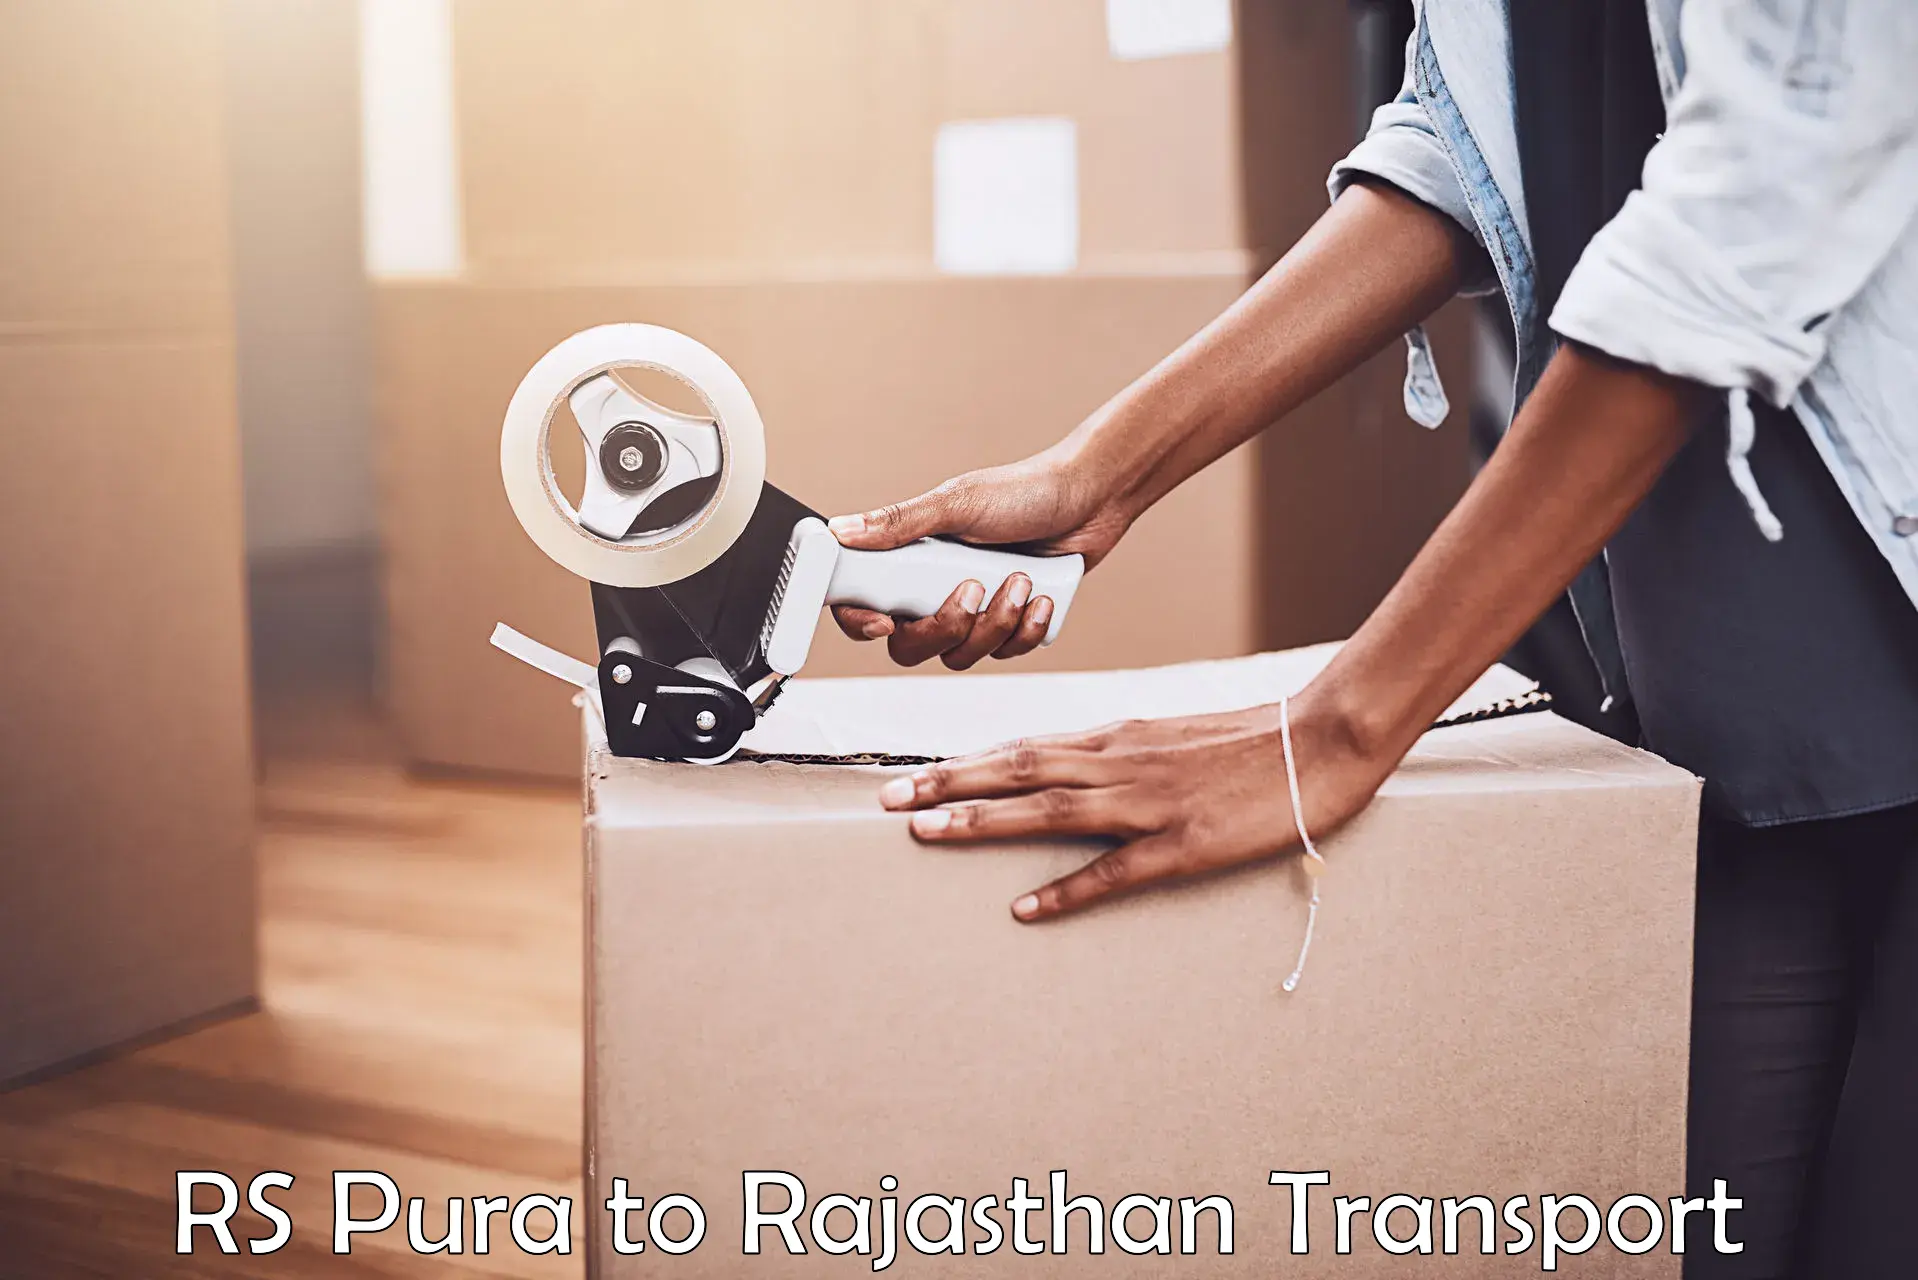 Part load transport service in India RS Pura to Pratapgarh Rajasthan